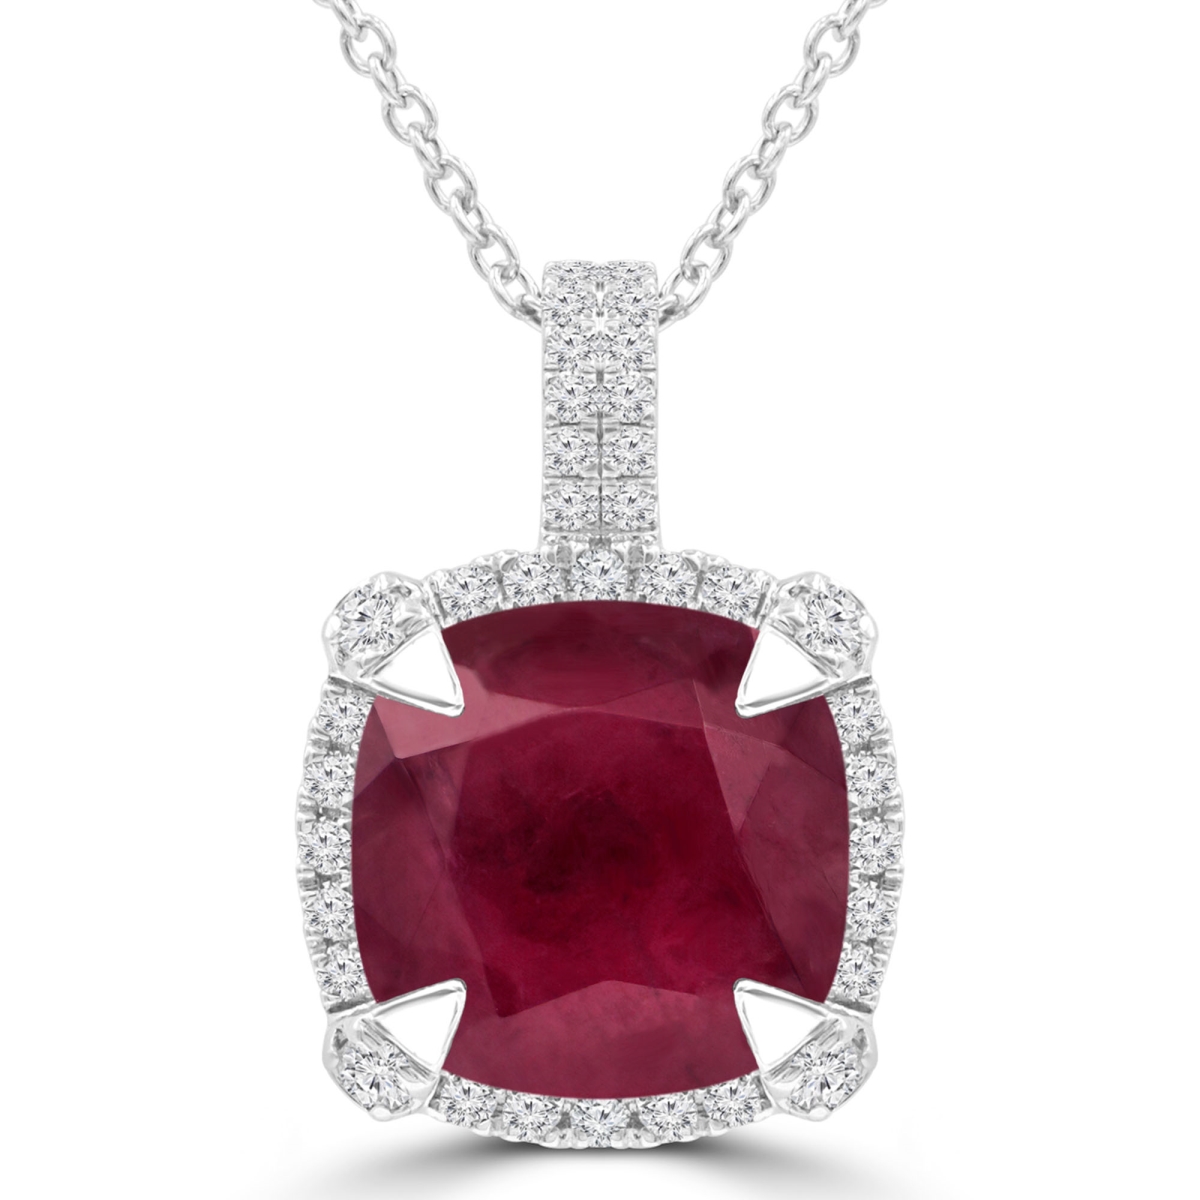 Picture of Majesty Diamonds MDR220151 5.8 CTW Cushion Red Ruby Claw Prong Cushion Halo Pendant Necklace in 14K White Gold